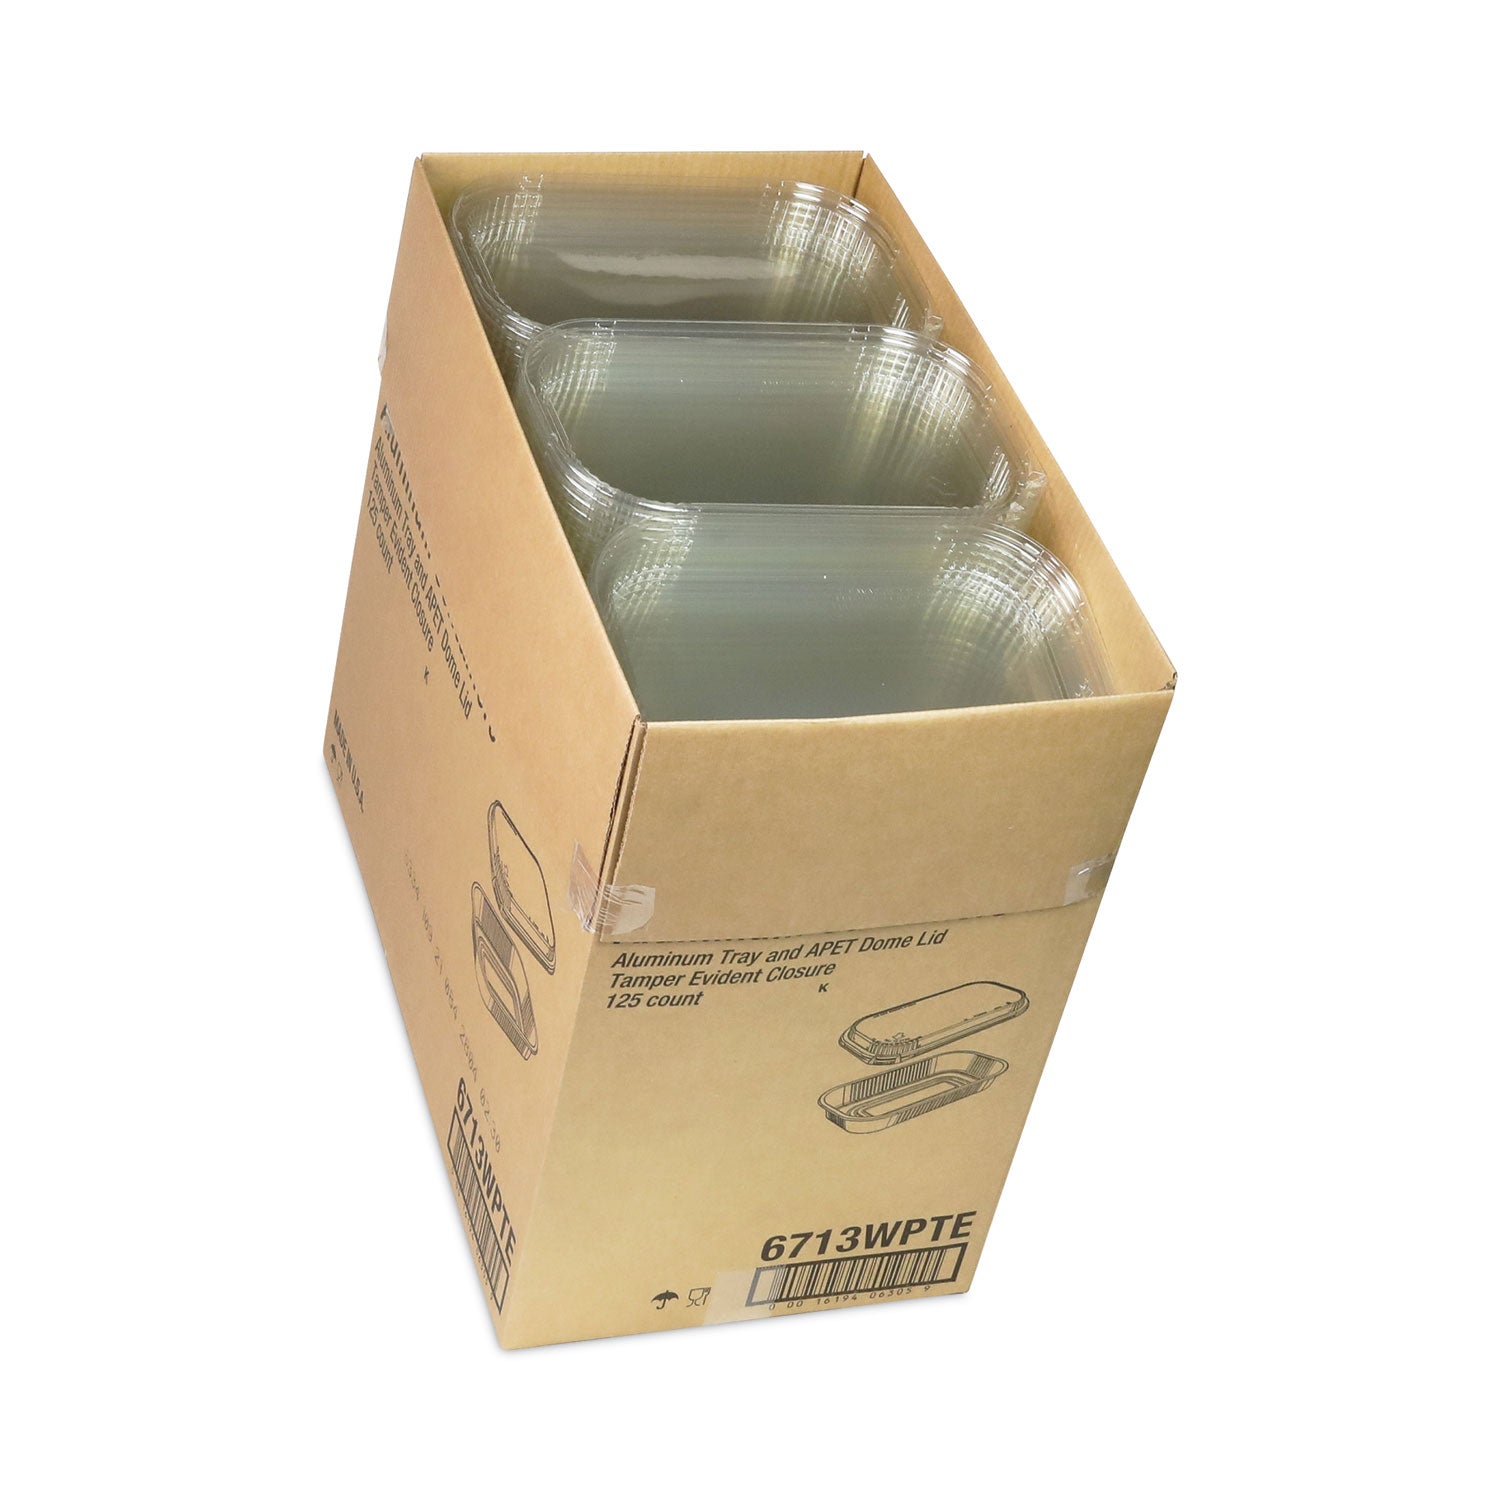 classic-carry-out-container_pct6713wpte - 3